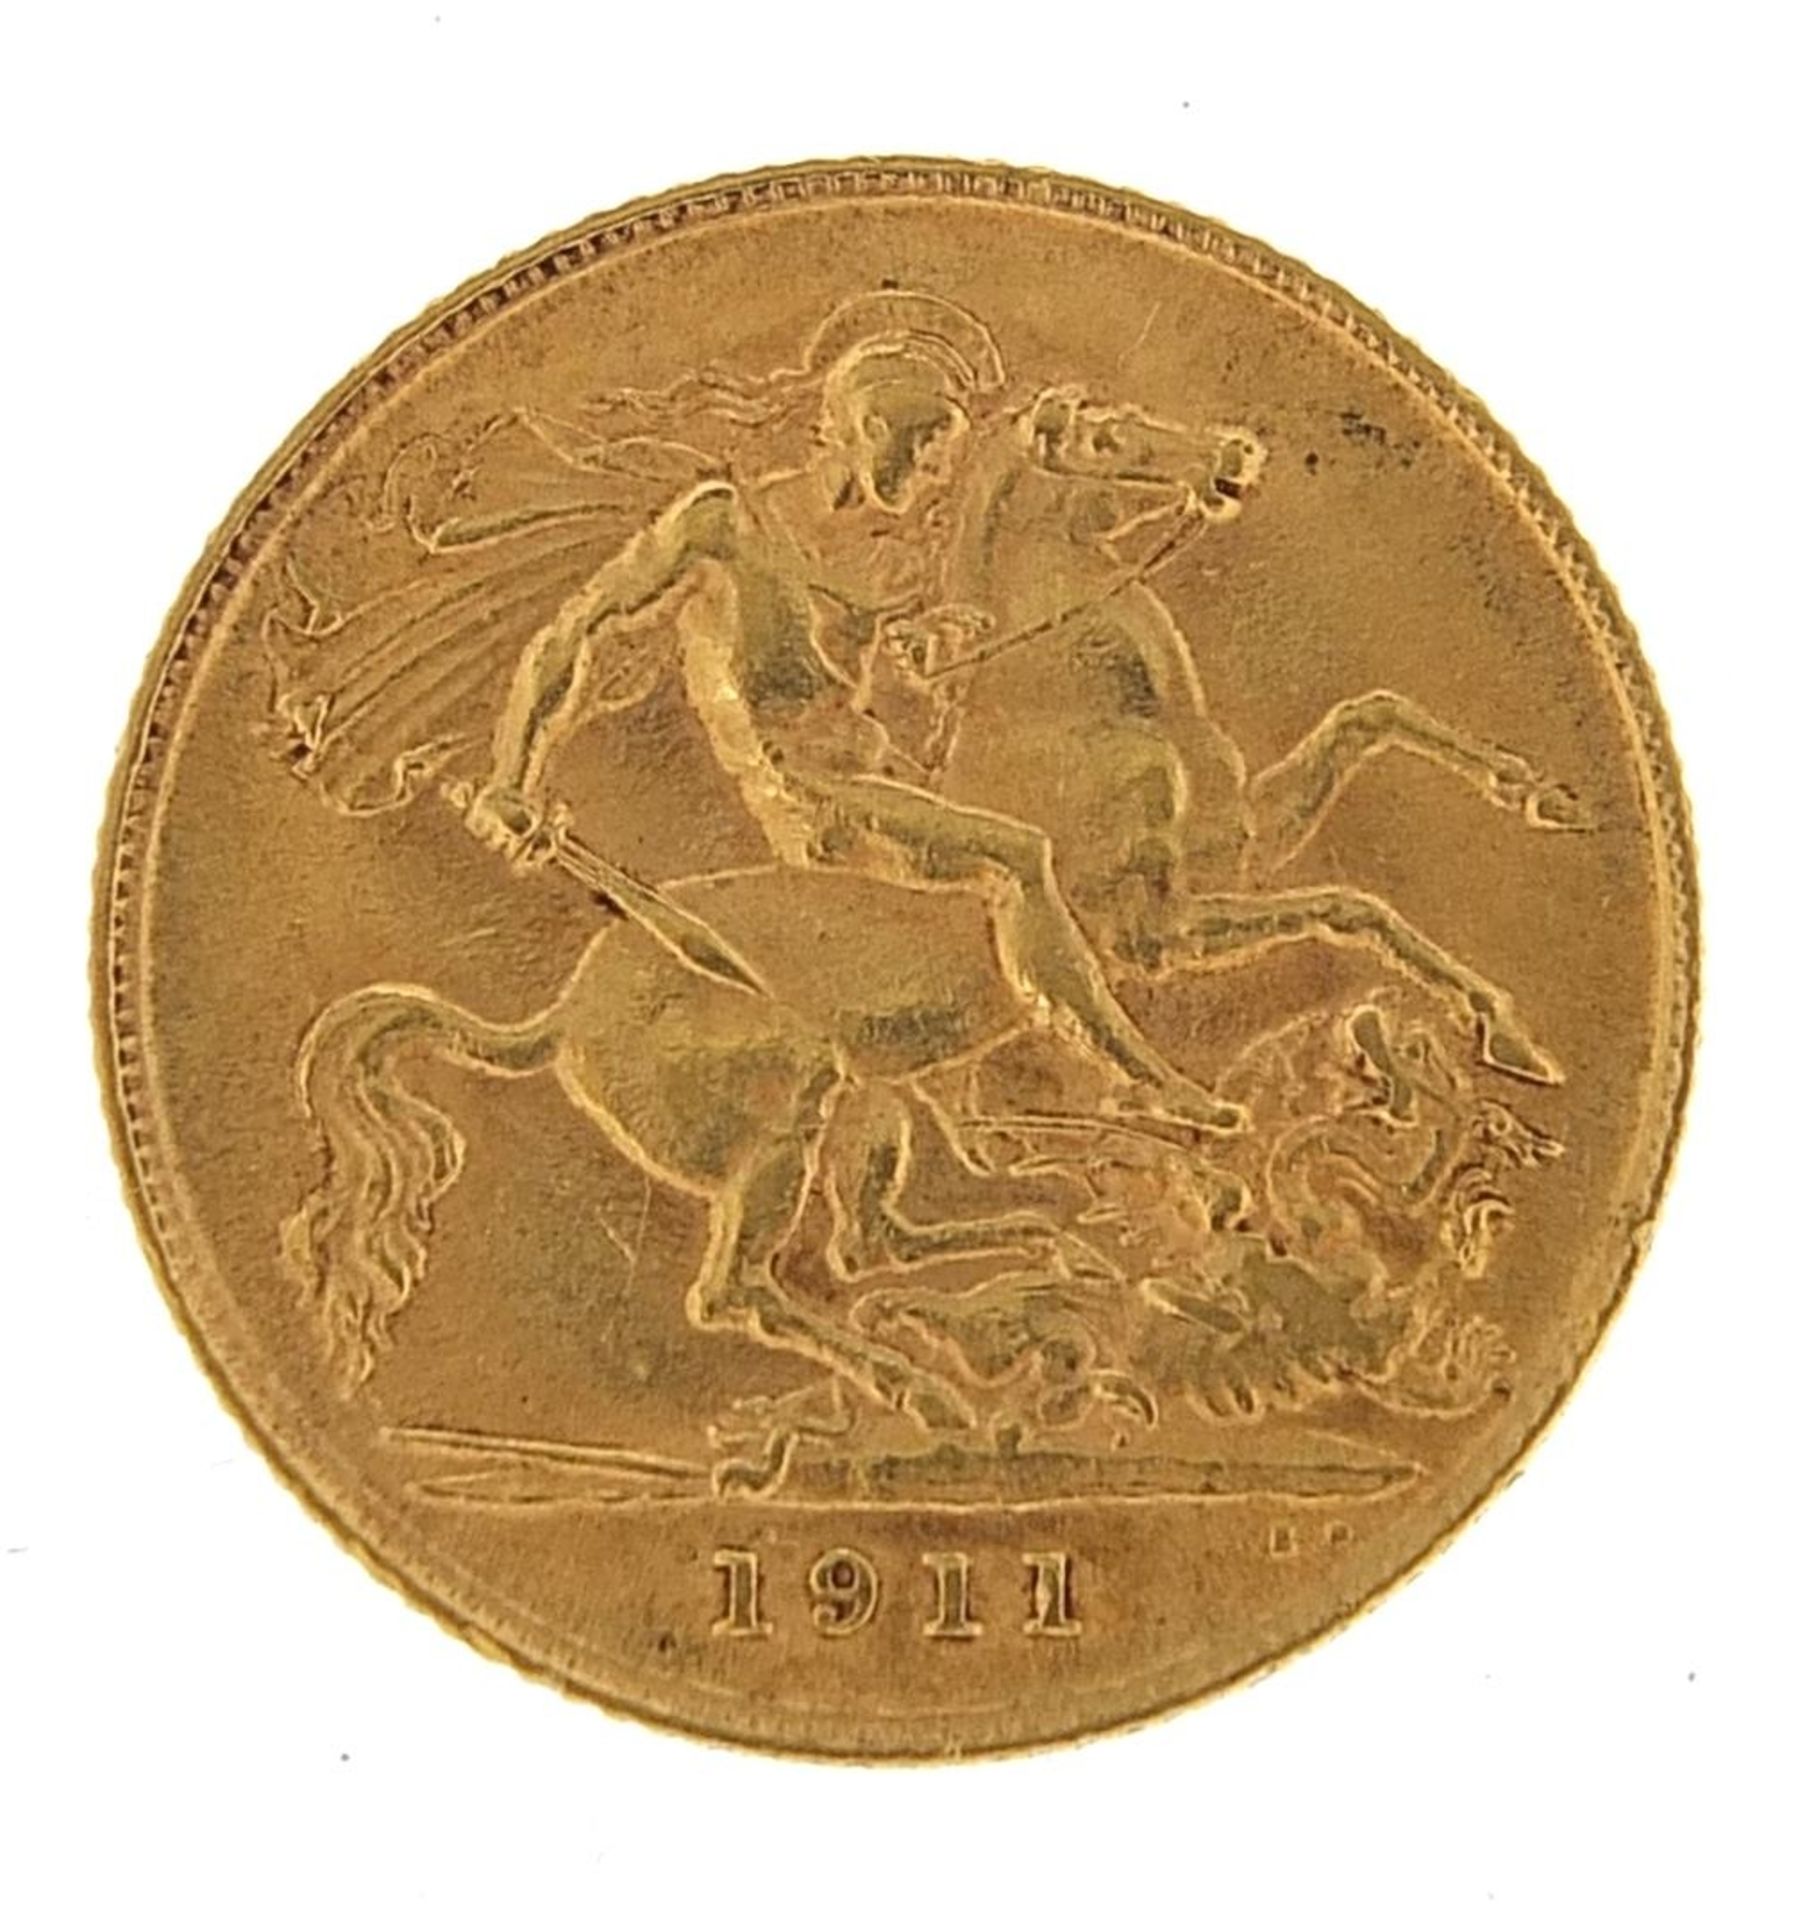 George V 1911 gold half sovereign - this lot is sold without buyer?s premium, the hammer price is